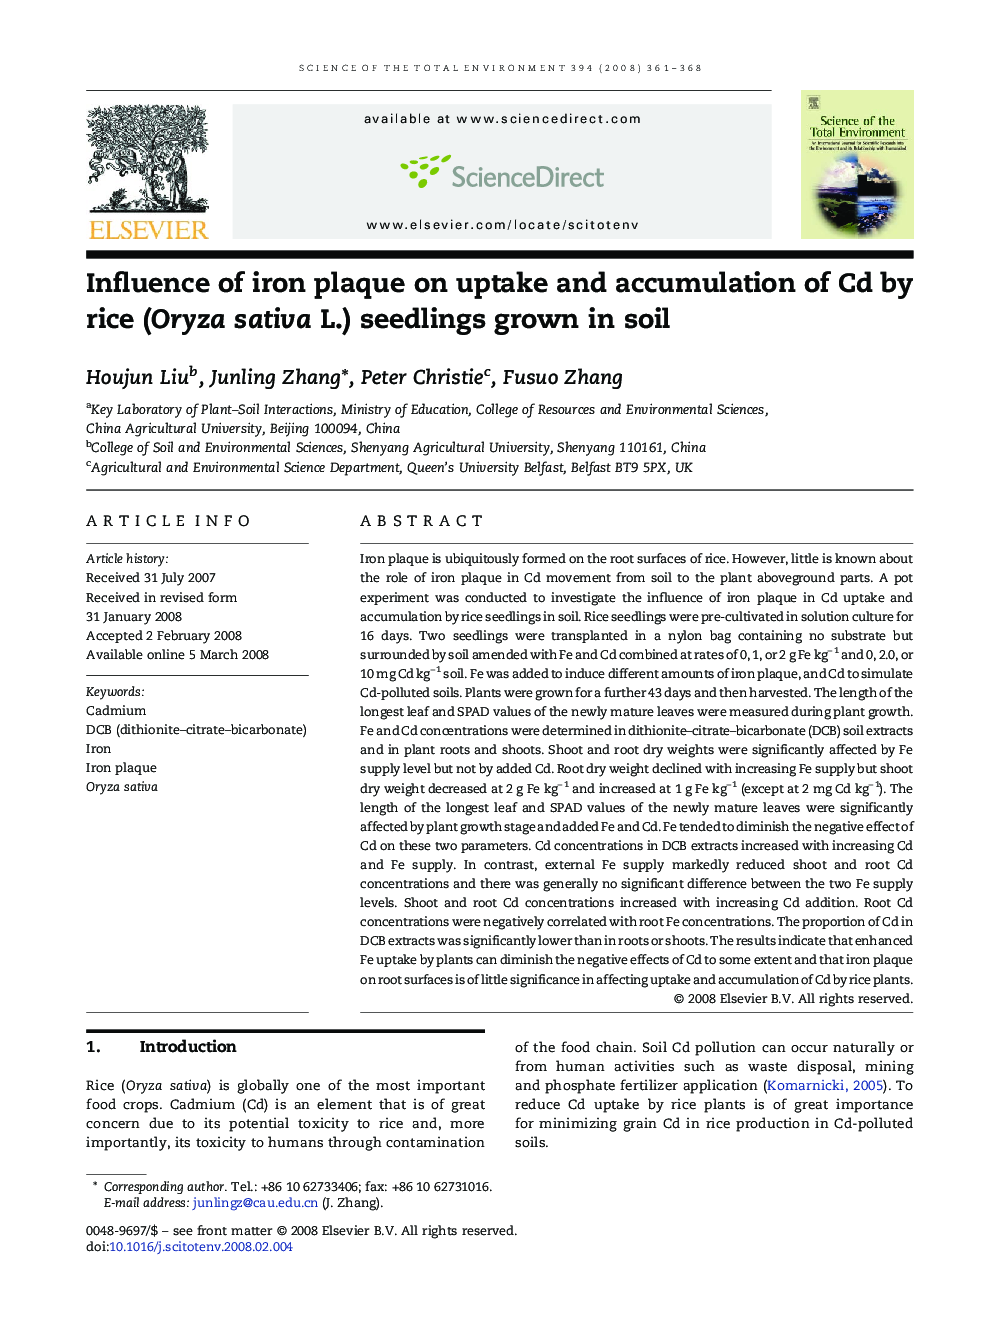 Influence of iron plaque on uptake and accumulation of Cd by rice (Oryza sativa L.) seedlings grown in soil